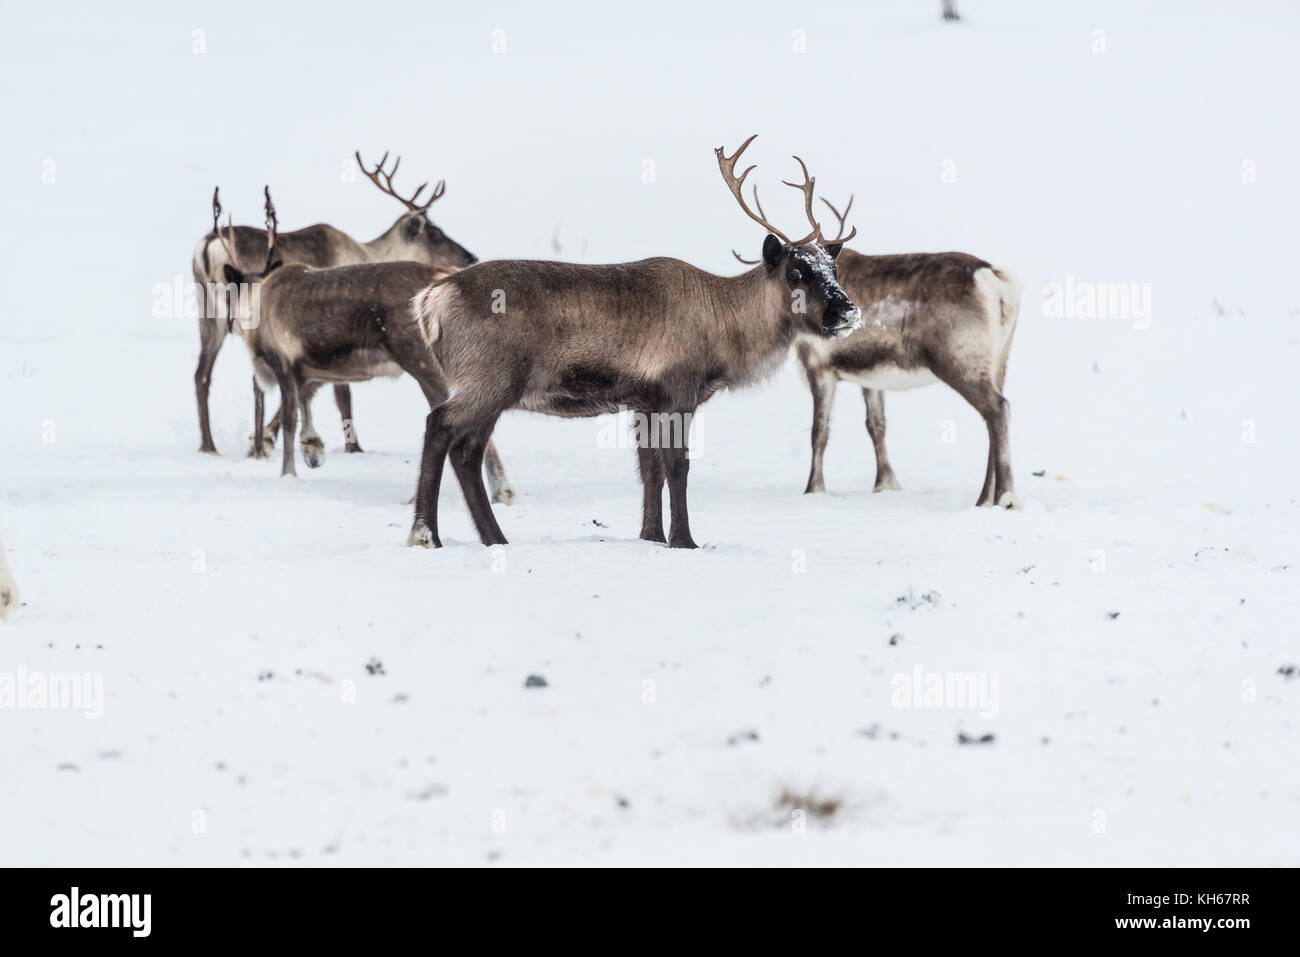 Reindeer herd, in winter, Lapland, Northern Finland - space for text Stock Photo